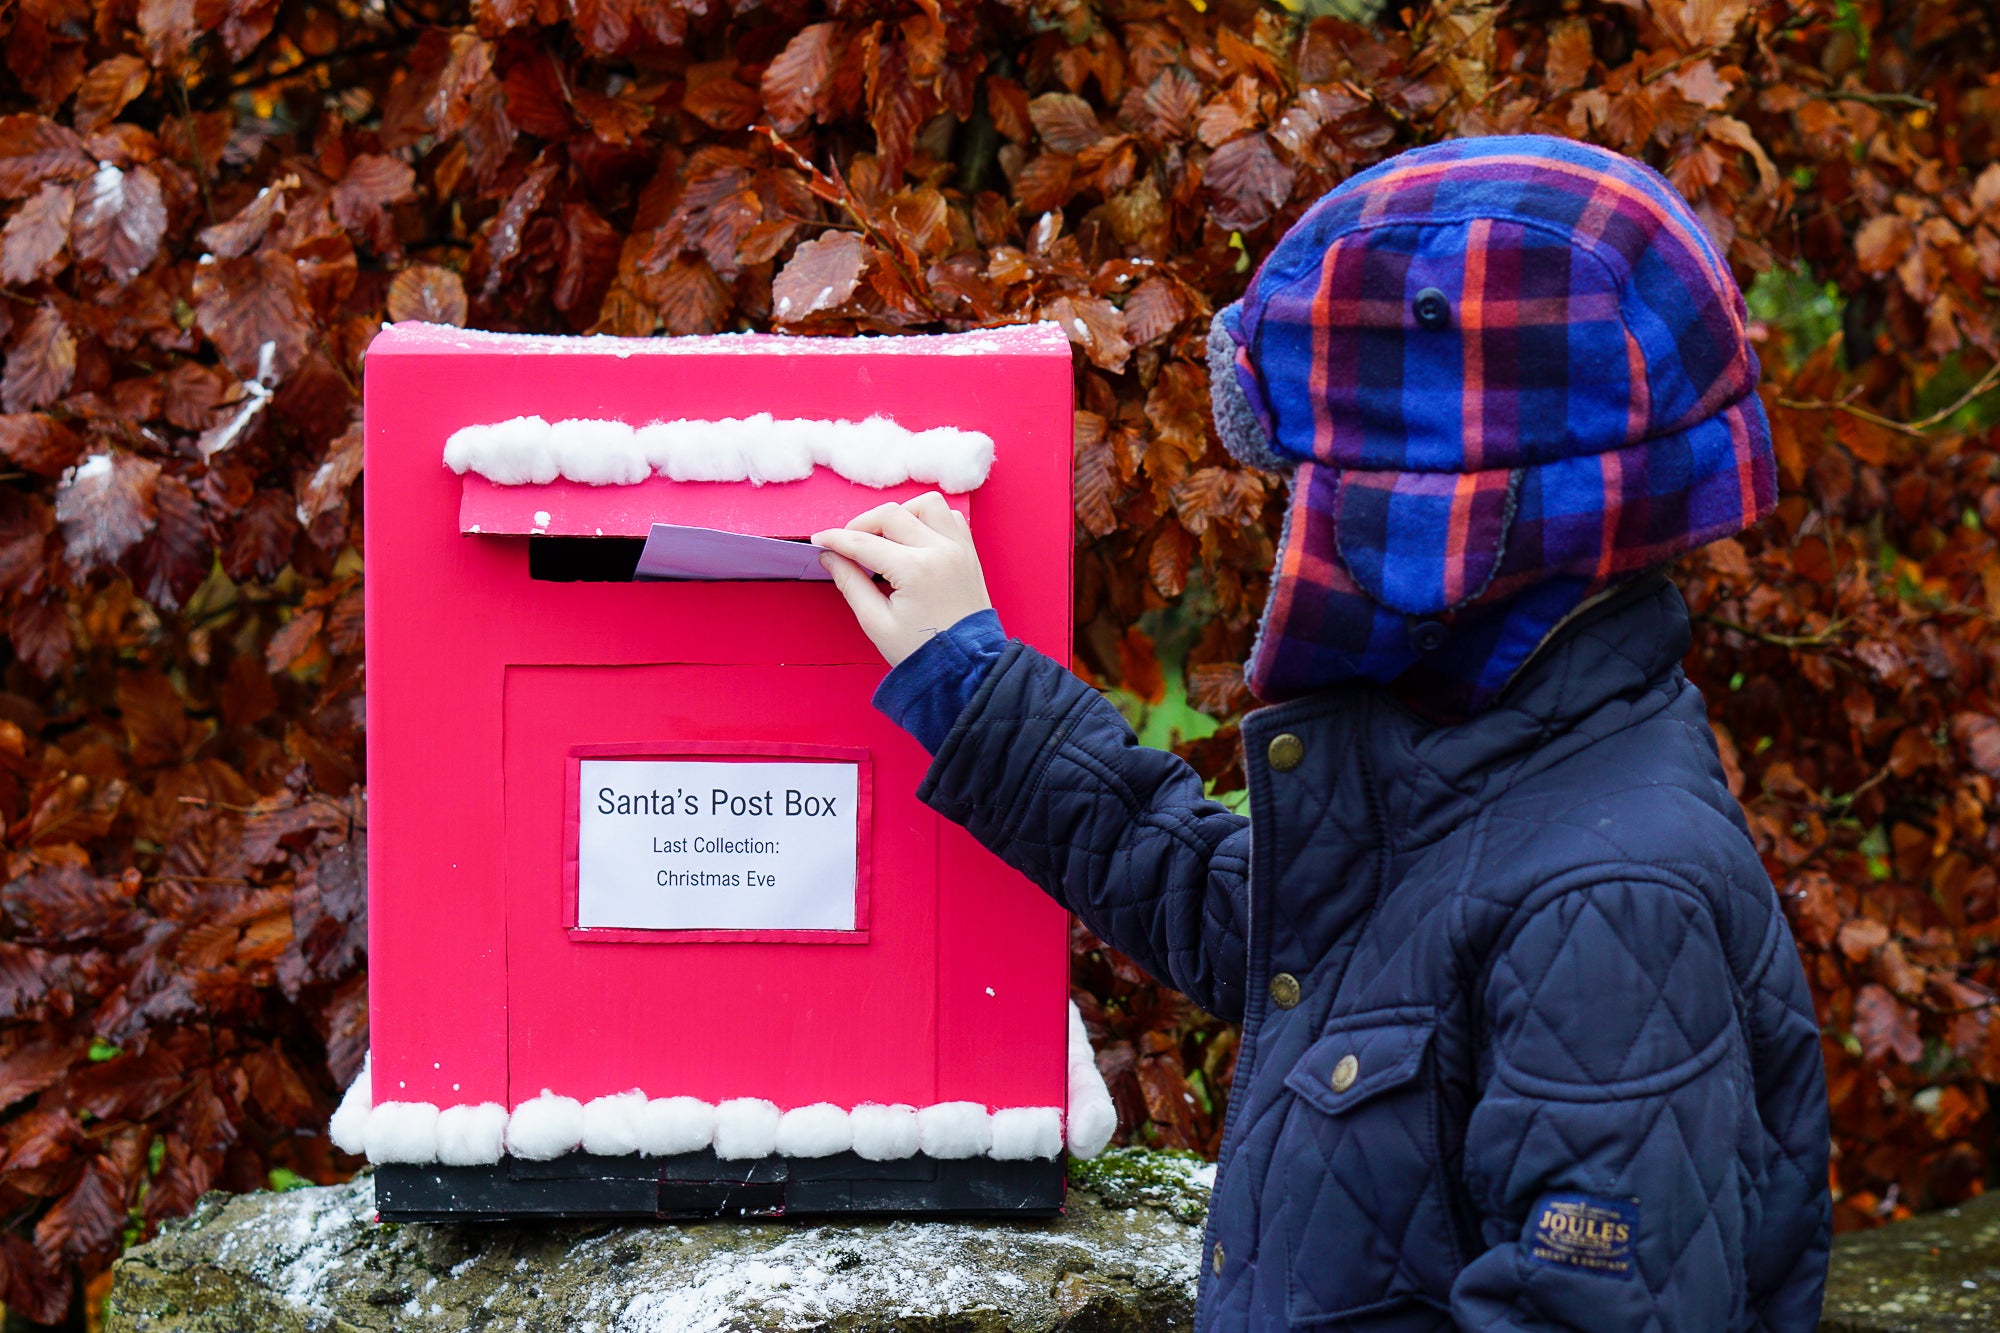 Make your own great little Christmas post box